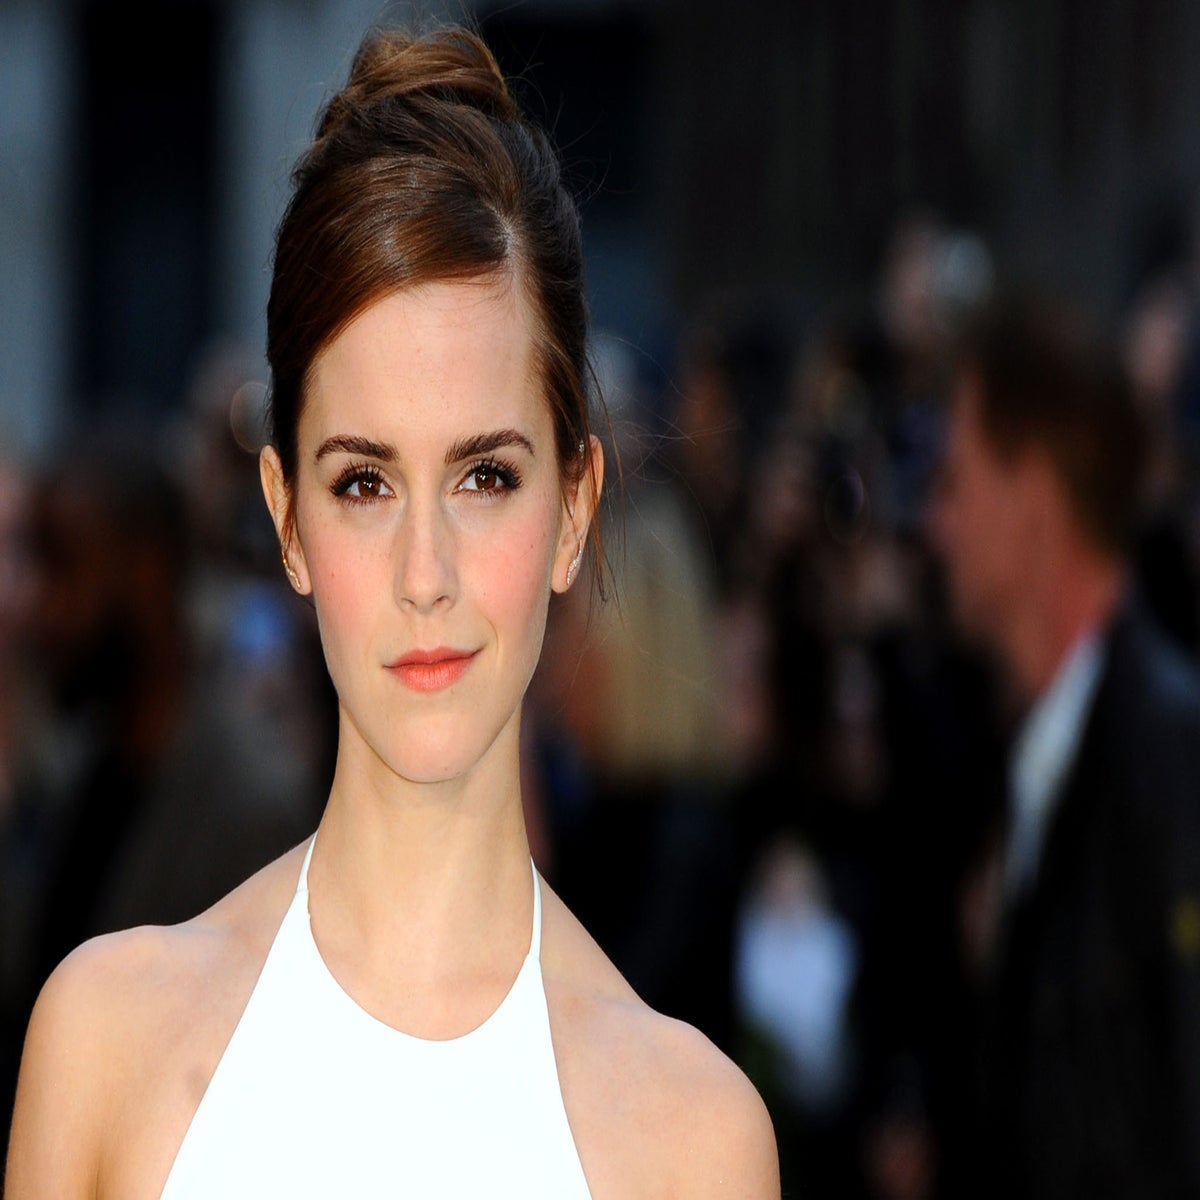 Xxx Video Of Emma Watson - Emma Watson nude video leak is a fake used to spread malware | The  Independent | The Independent